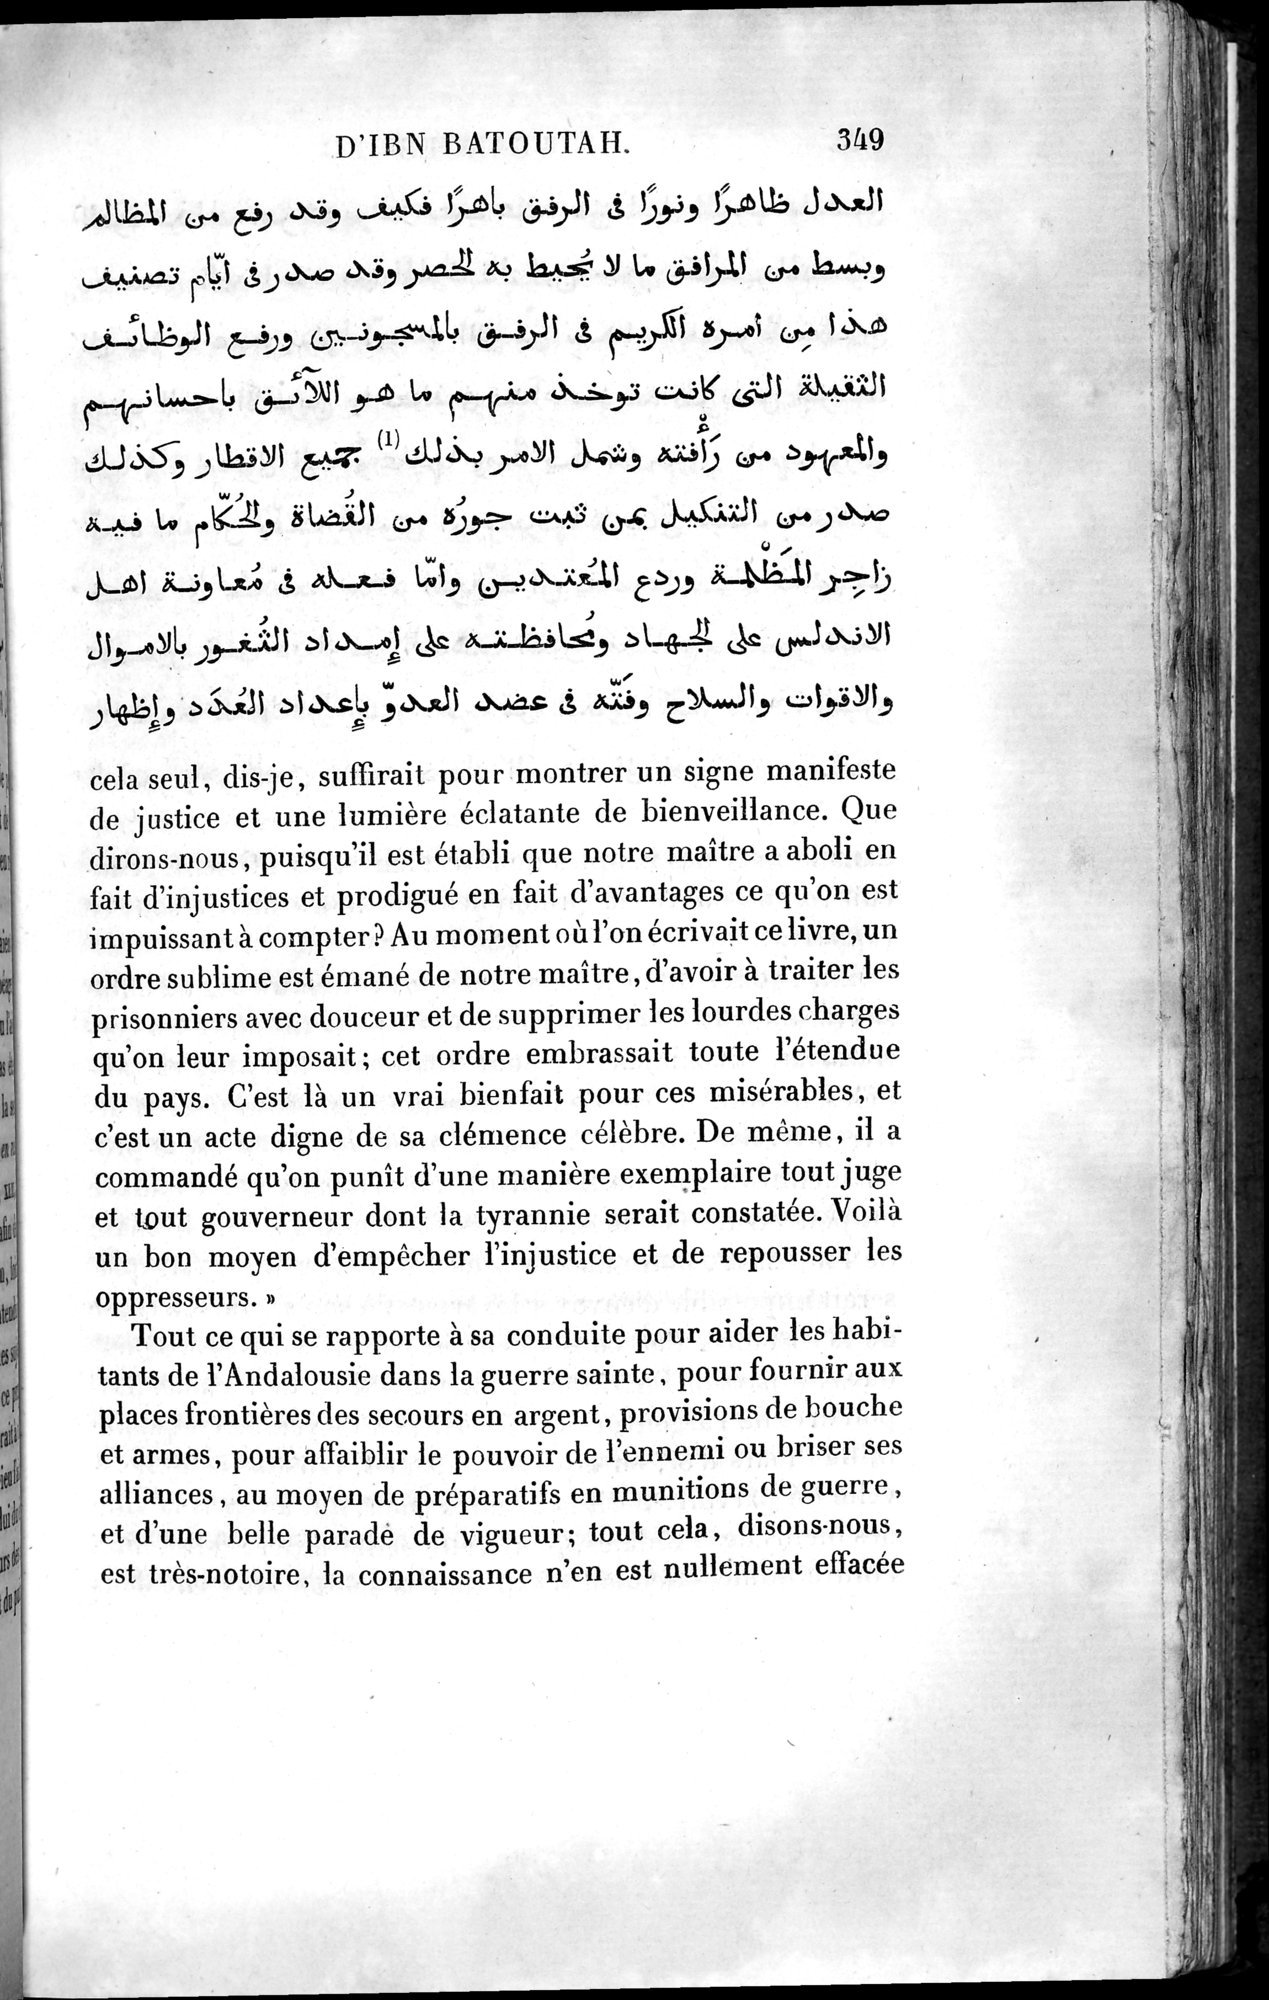 Voyages d'Ibn Batoutah : vol.4 / Page 361 (Grayscale High Resolution Image)